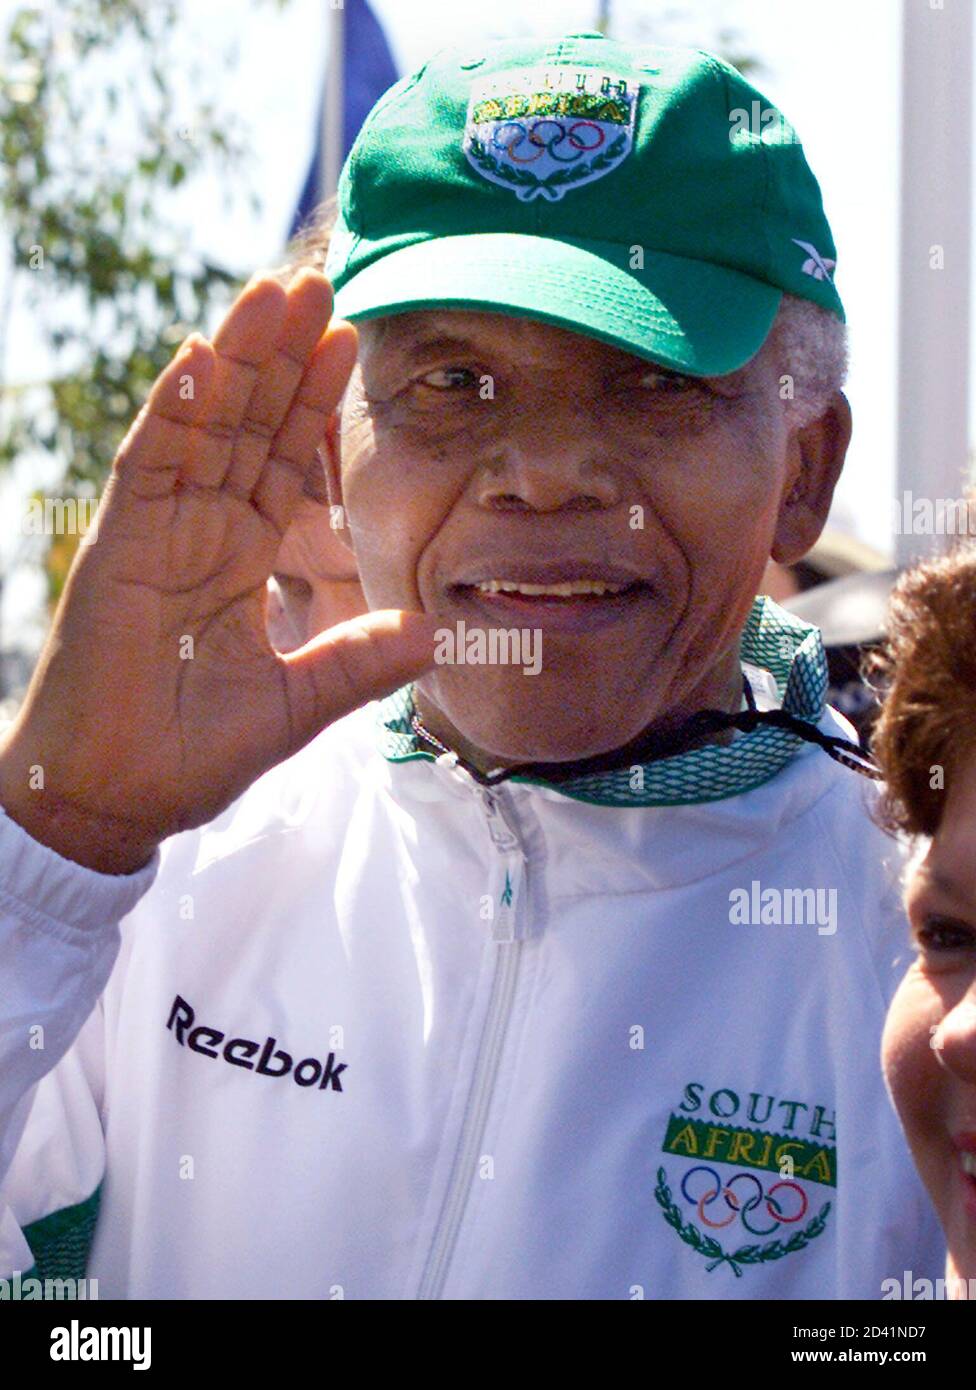 South Africa's Nelson Mandela, wearing a South African team outfit, waves  as he arrives at the athletes' village for the Sydney 2000 Olympic Games  September 5, 2000. Mandela toured the village and